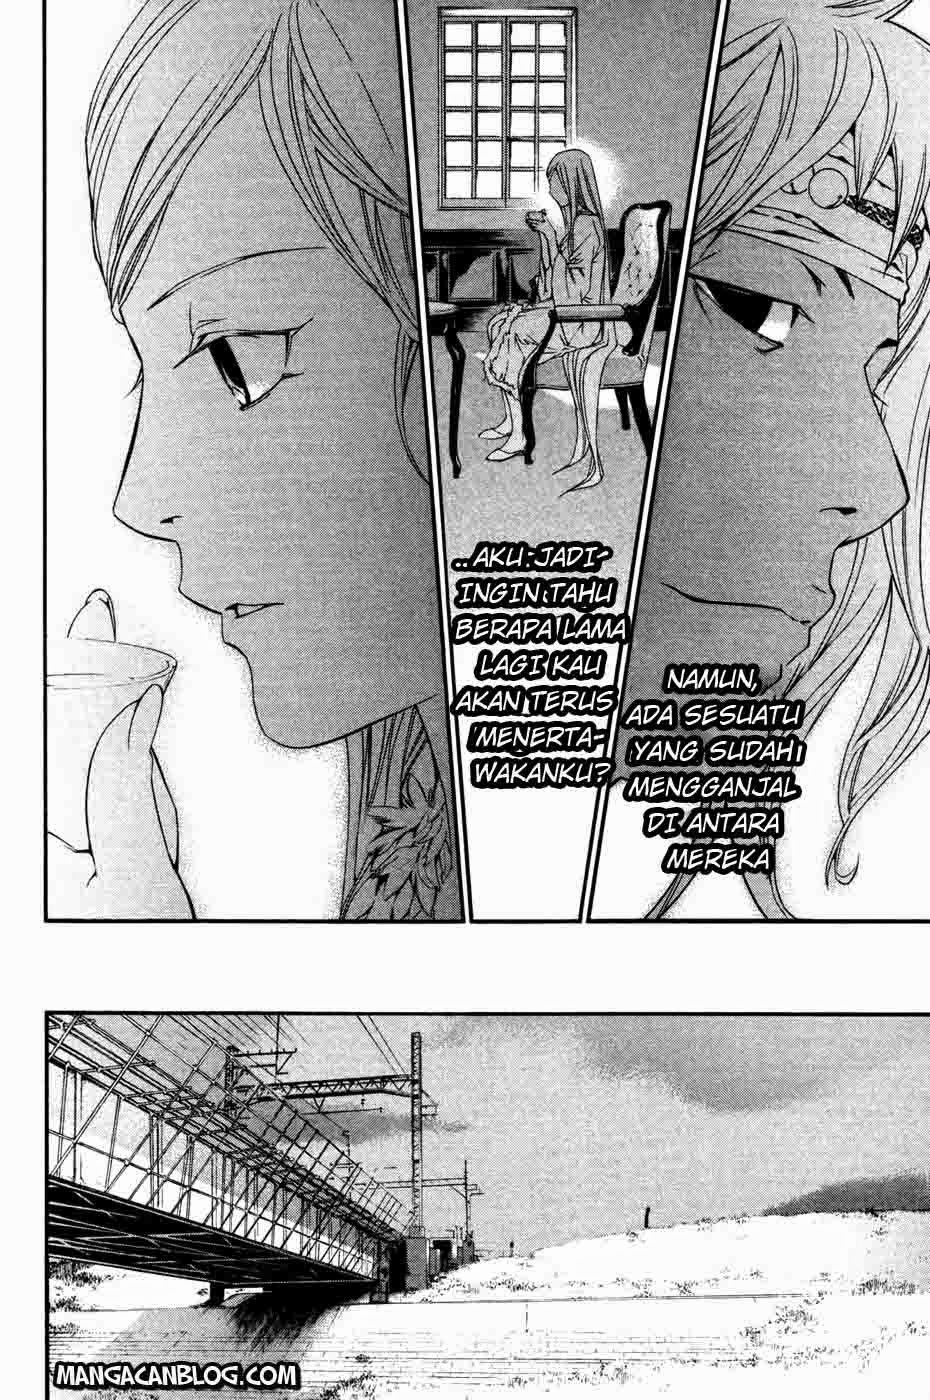 Noragami Chapter 16